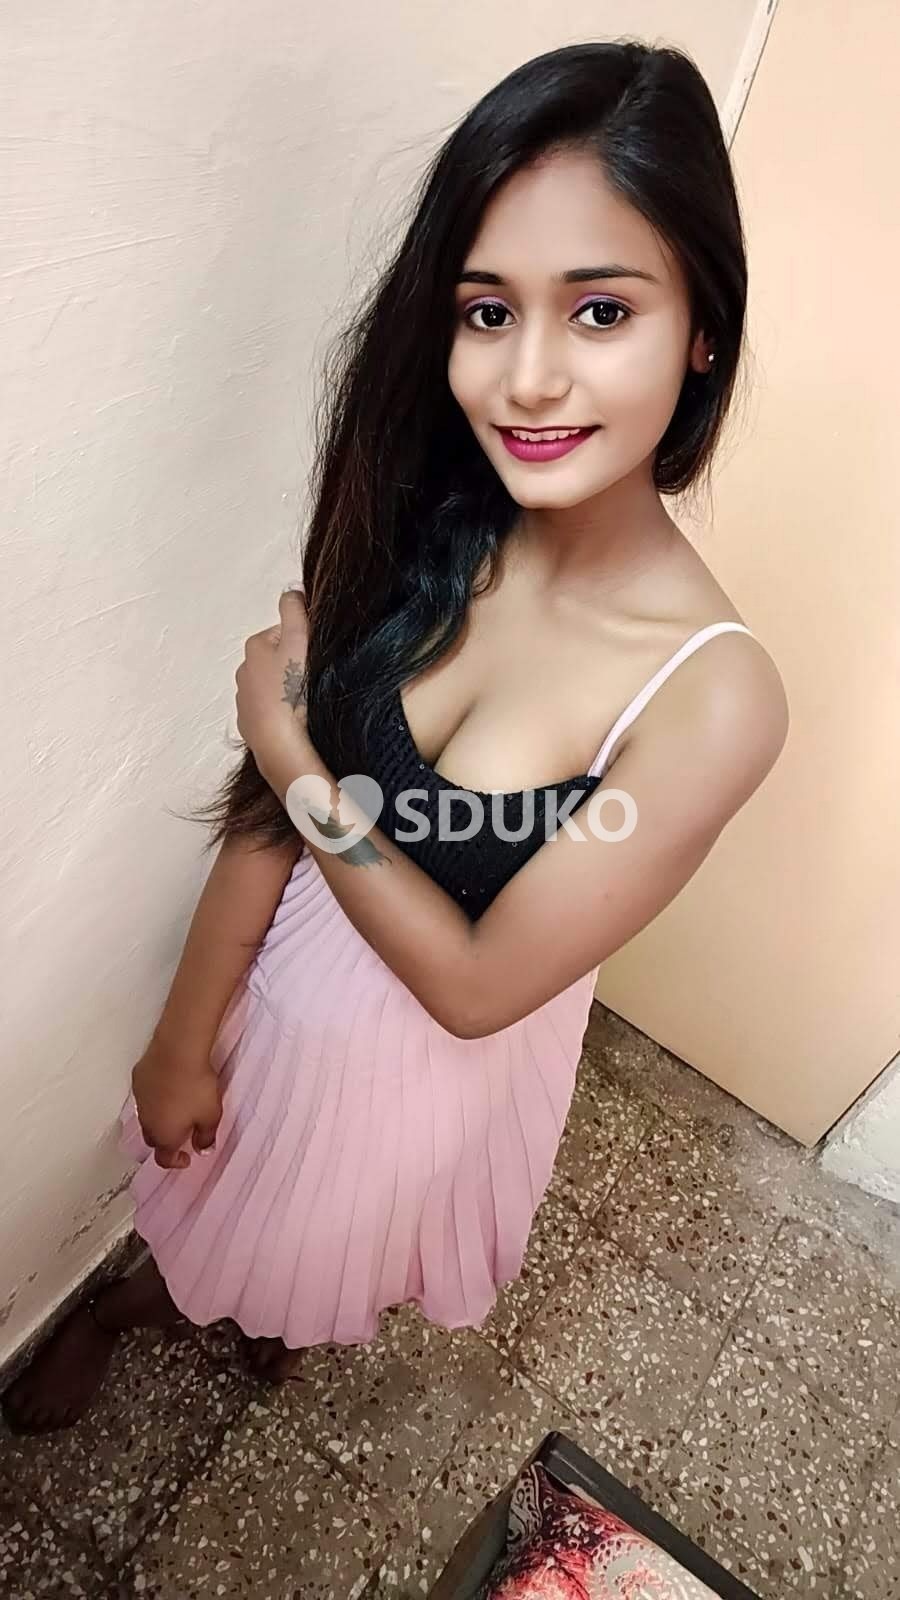 Nashik CITY 24 X 7 HRS AVAILABLE SERVICE 100% SATISFIED AND GENUINE CALL GIRLS SER